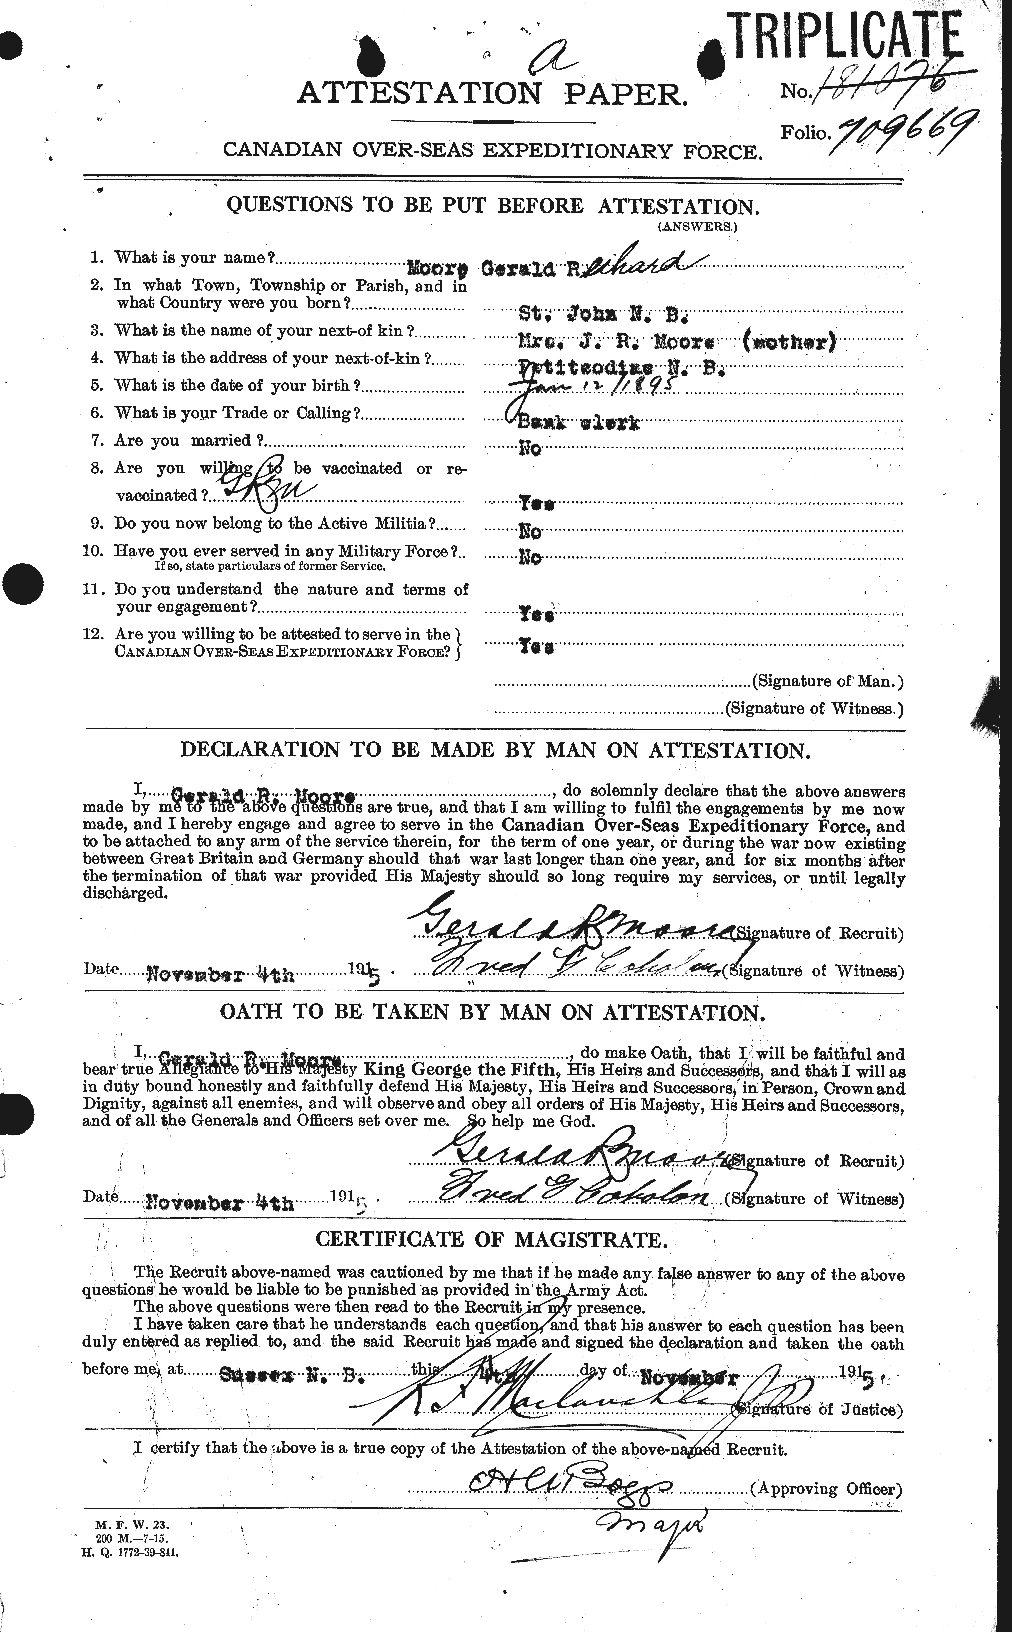 Personnel Records of the First World War - CEF 502035a